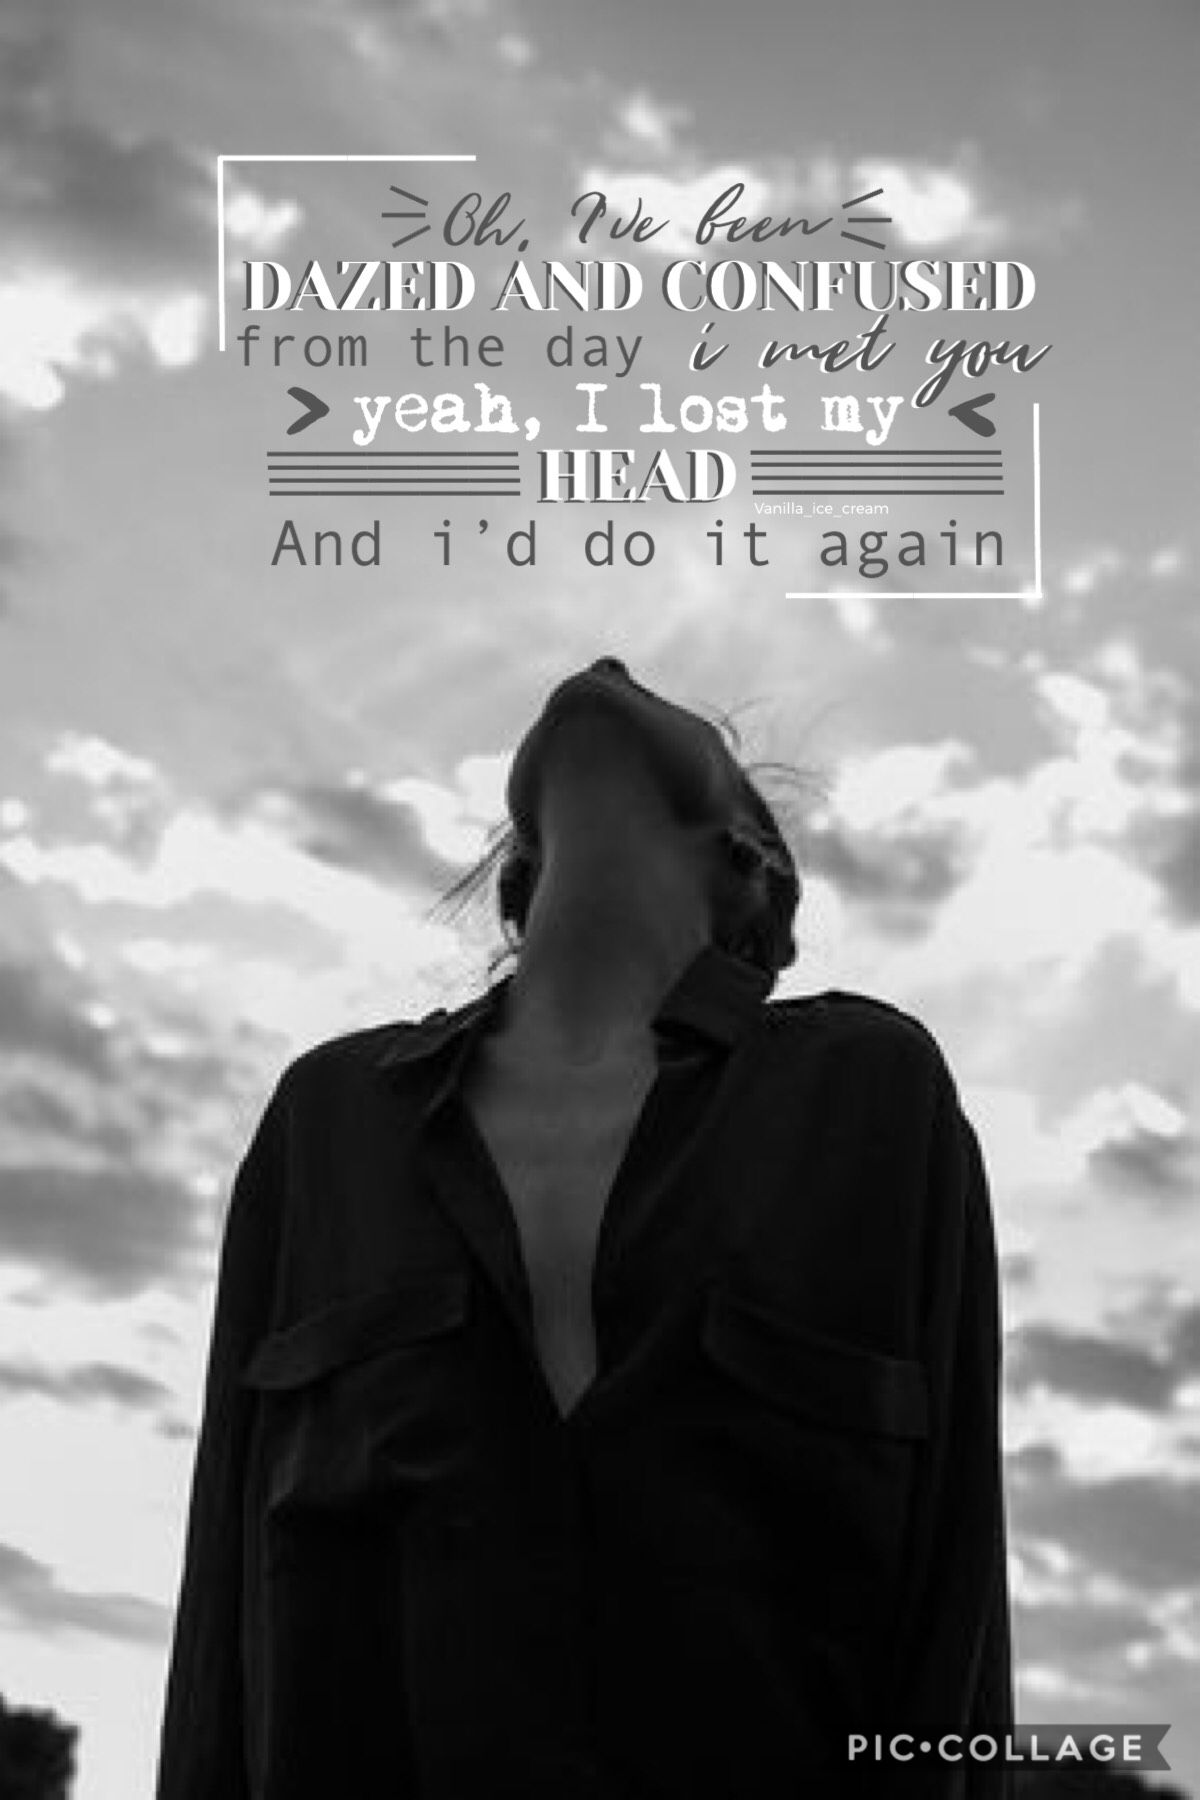 🖤☁️Tap☁️🖤

Lyrics from ‘Dazed & Confused’ by Ruel
Ahh I love Ruel sm 
Everyone’s posting story’s on insta of his concert and i’m lowkey jealous lol
